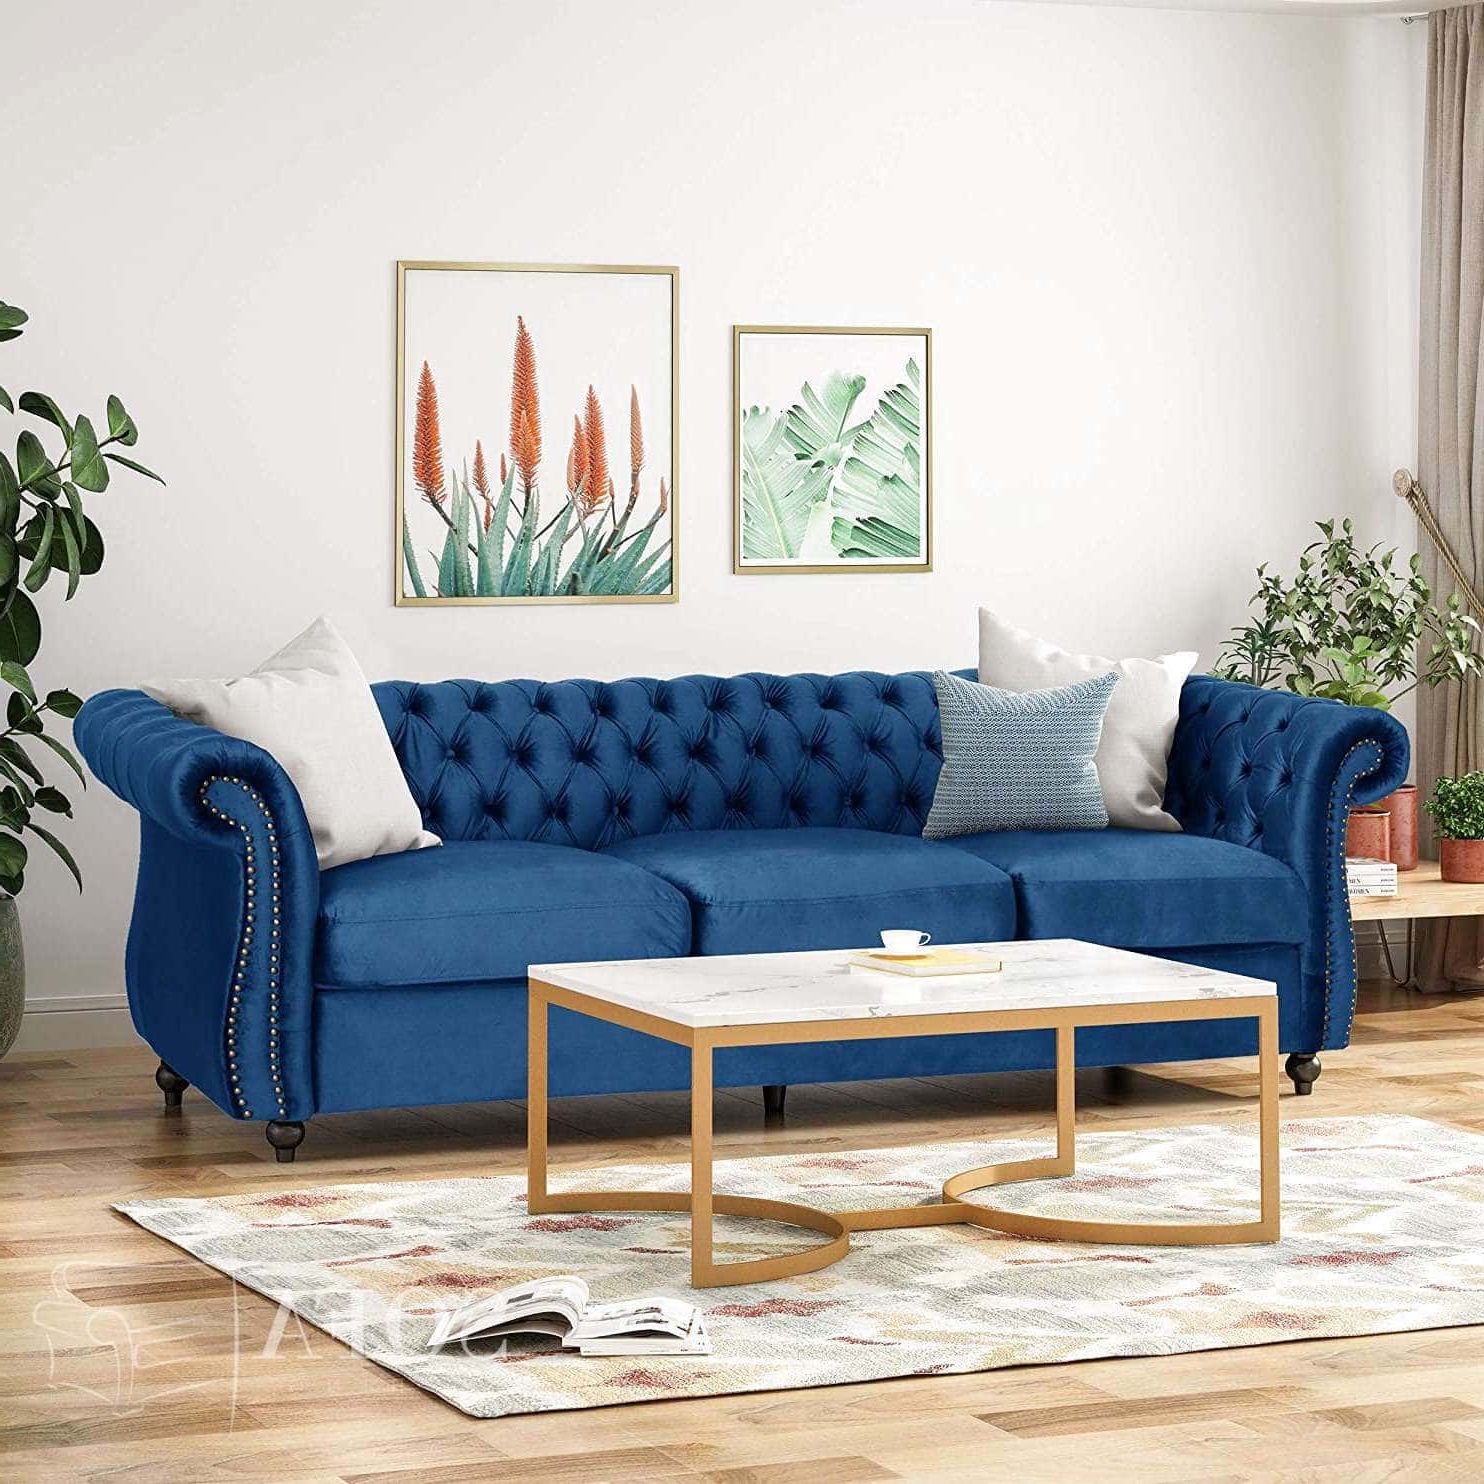 Best Dark Blue Sofas | Our Top 5 High Quality Blue Sofas With Regard To Sofas In Blue (Gallery 1 of 20)